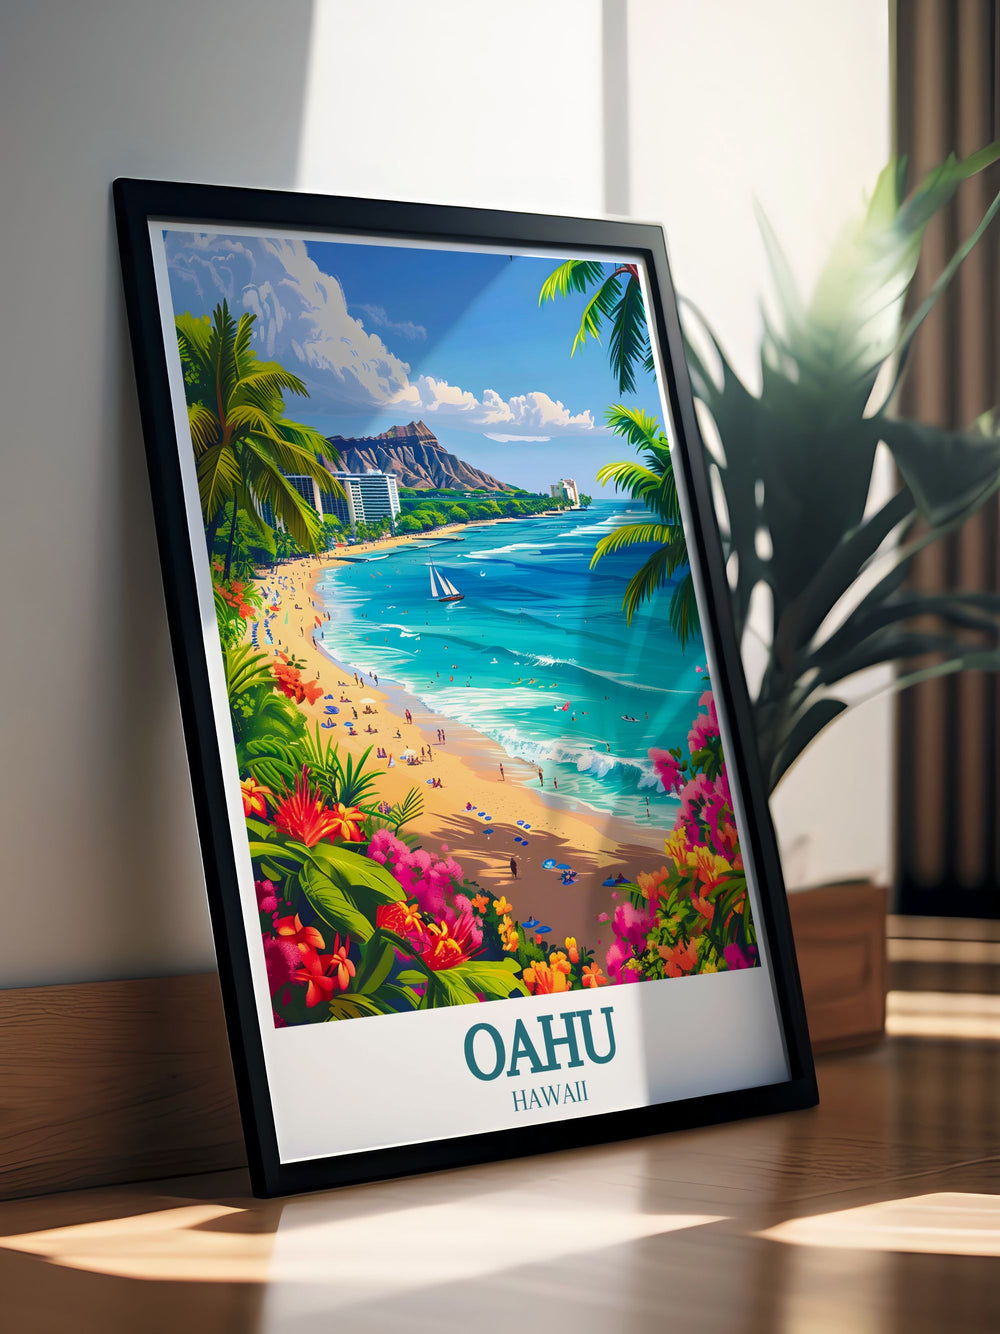 Stunning Oahu poster featuring Waikiki Beach and Diamond Head Crater a great addition to your wall art collection bringing the serene beauty of Hawaii into your space.